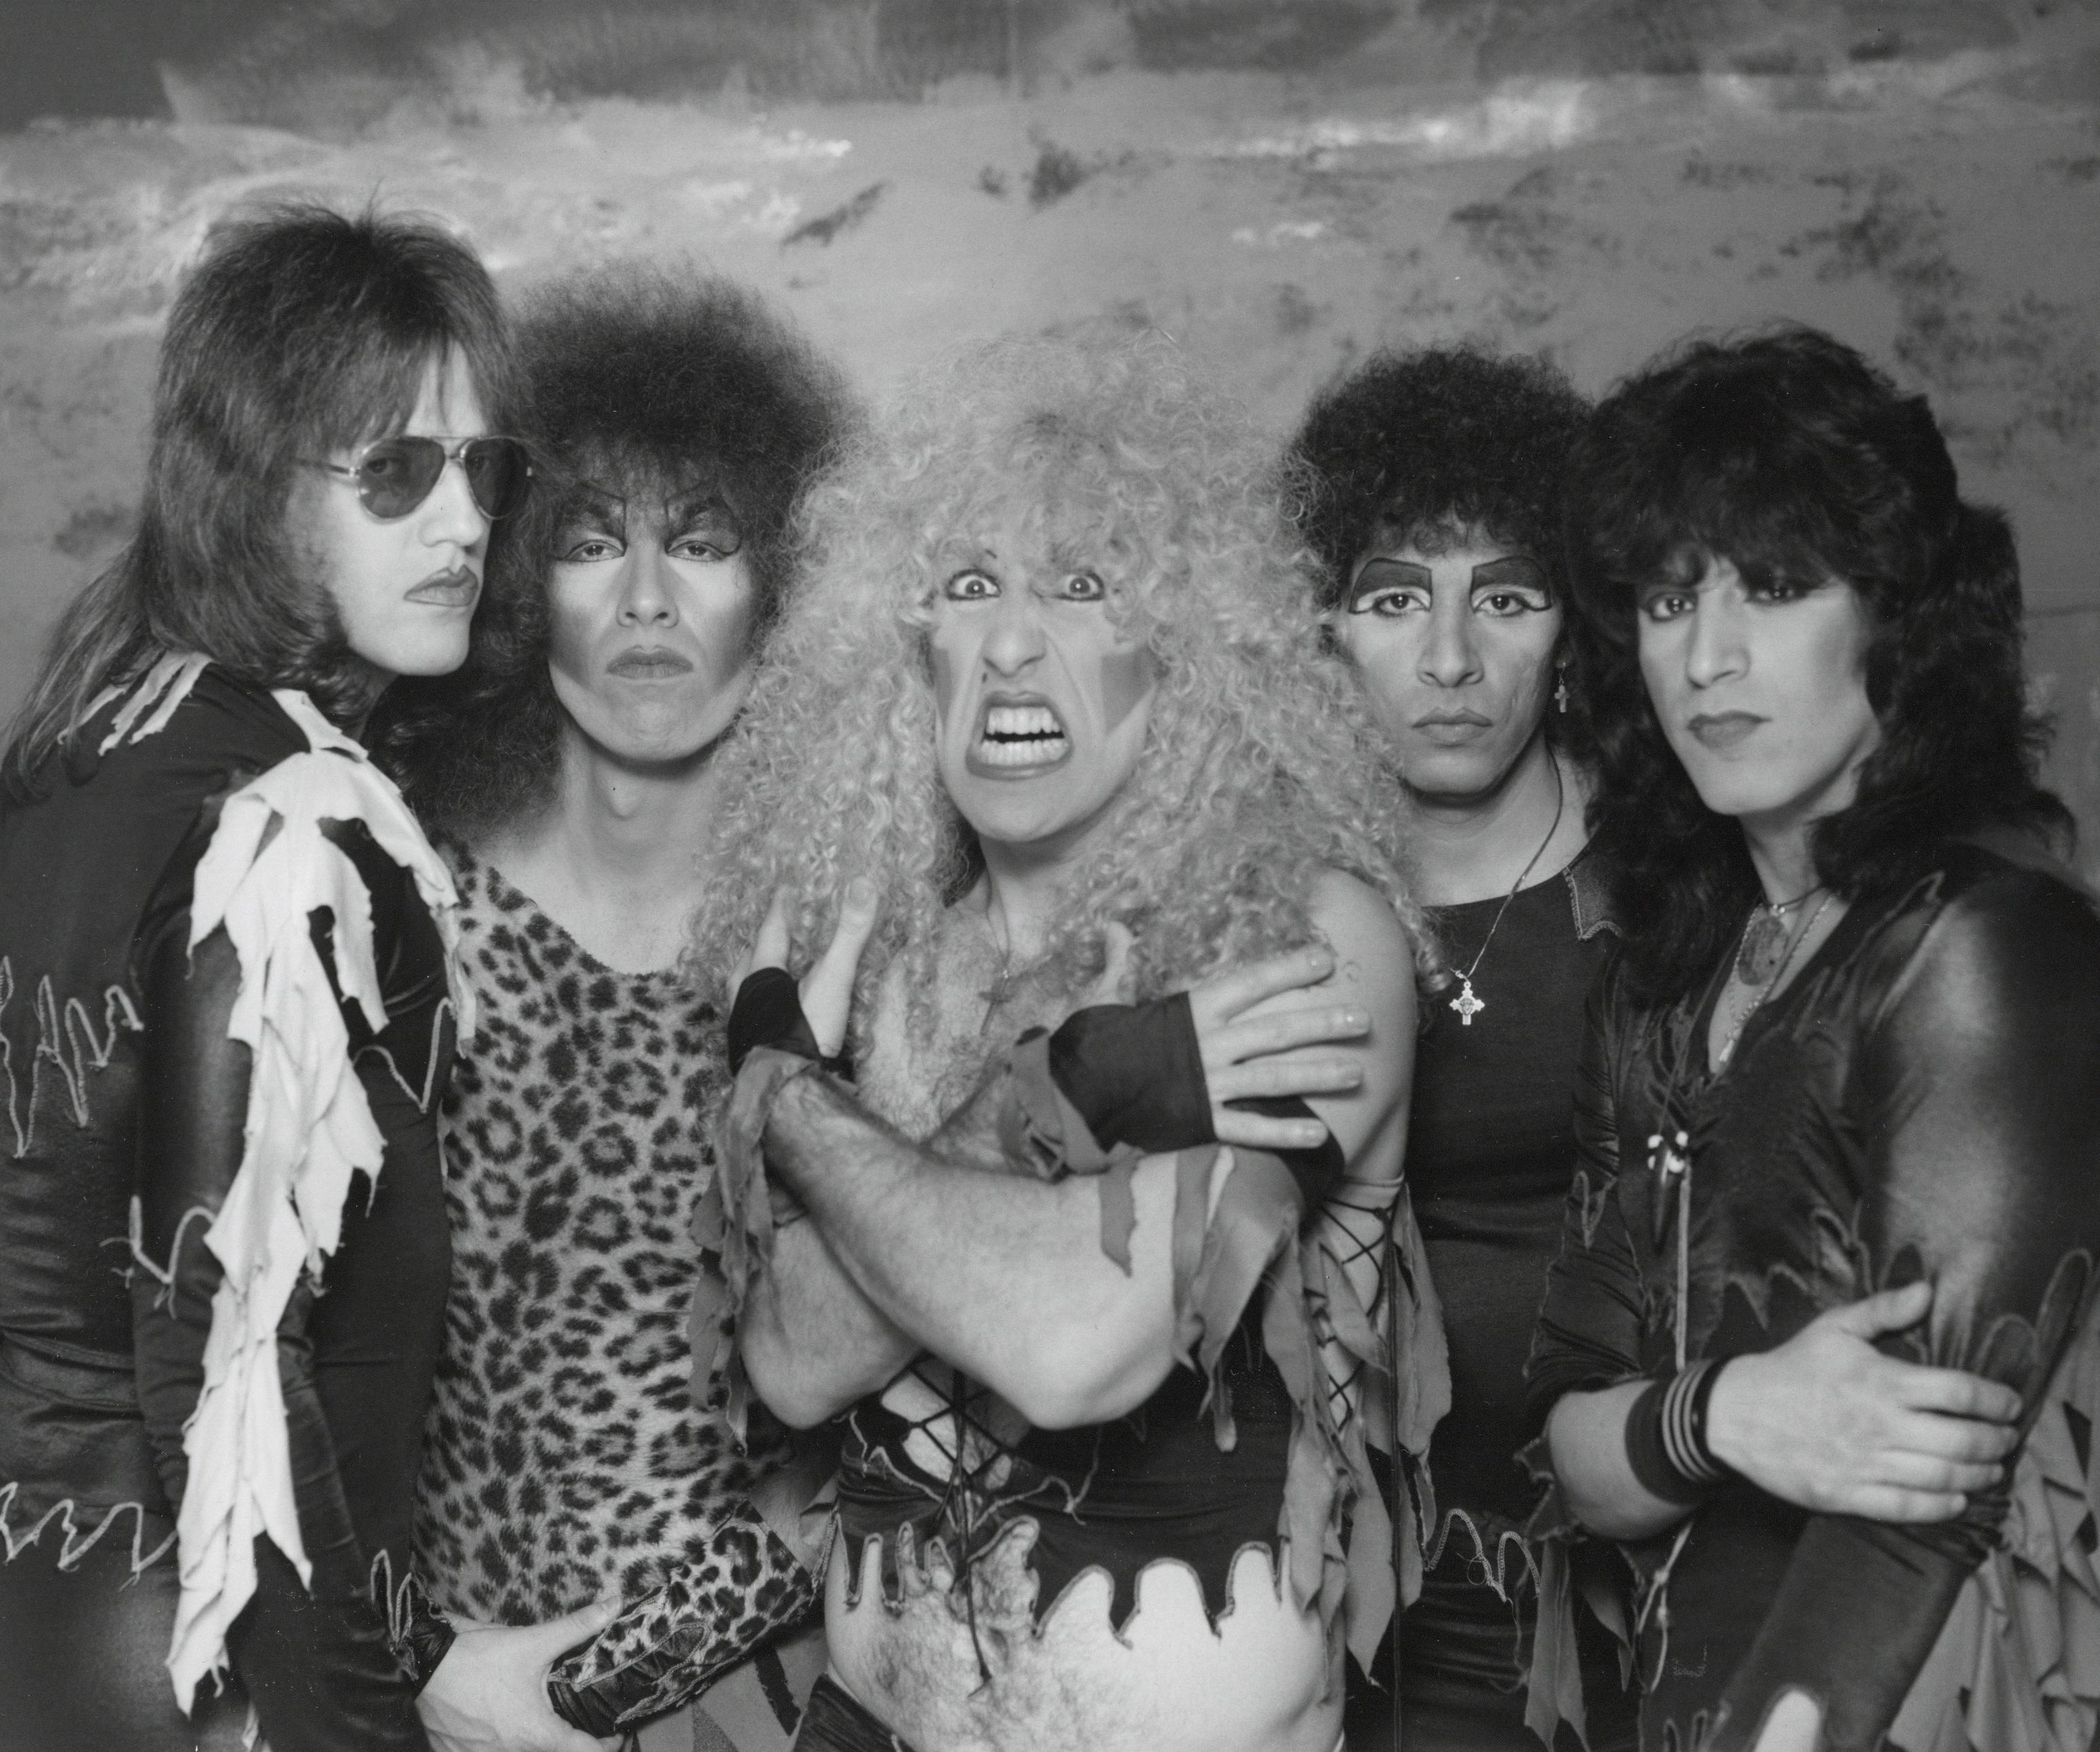 Unknown Black and White Photograph - Twisted Sister Group Portrait Vintage Original Photograph